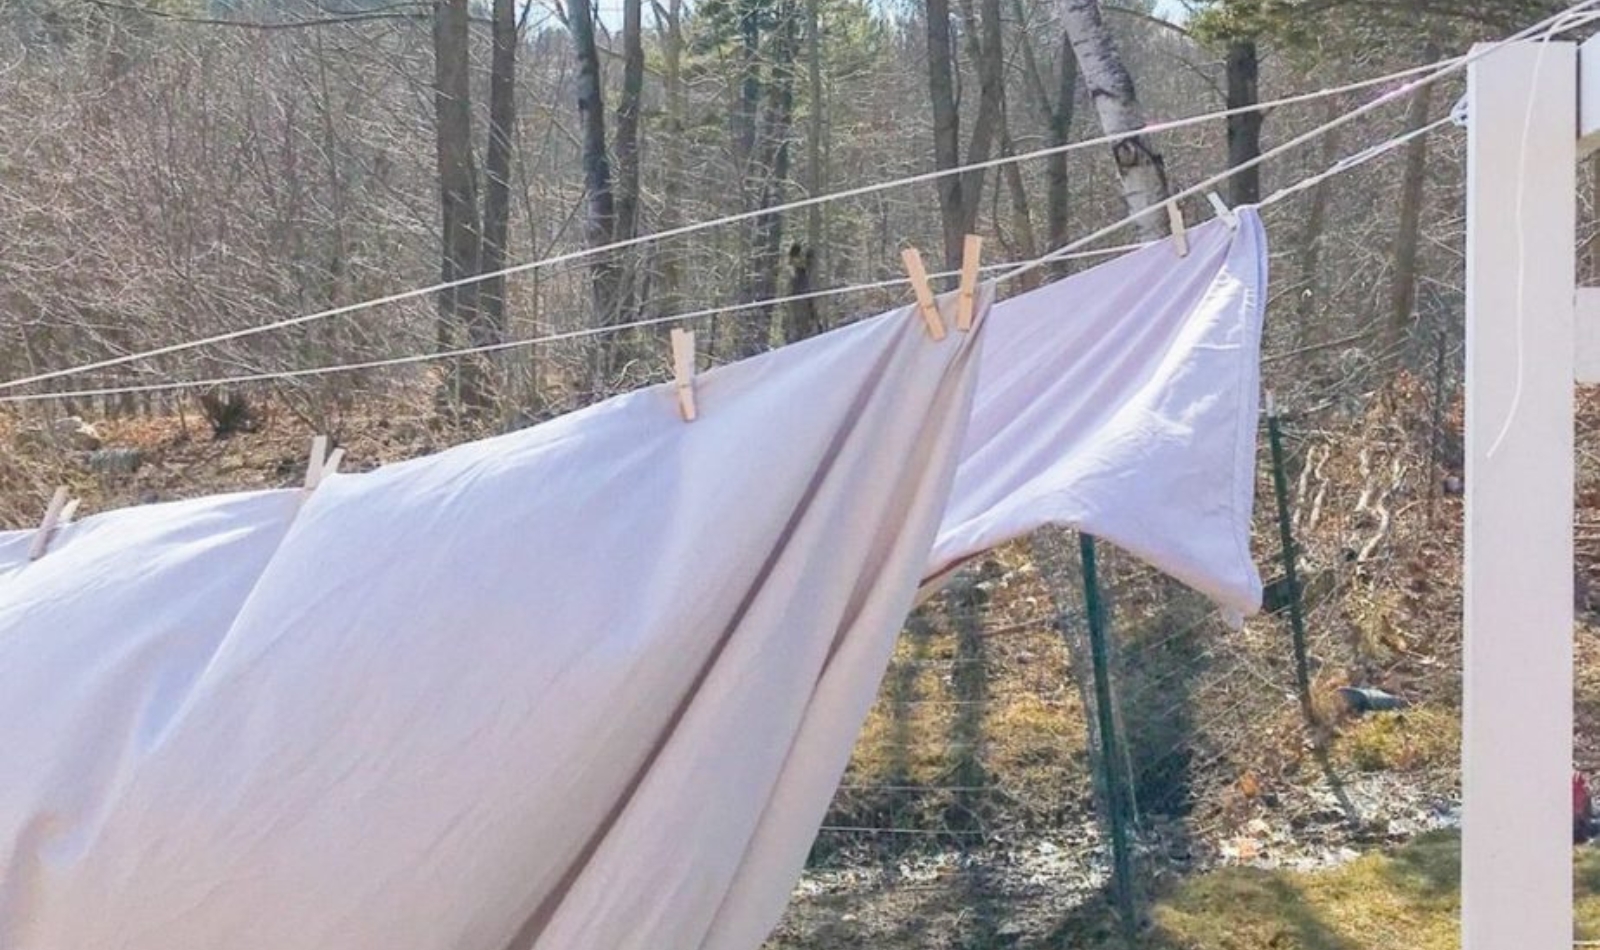 sheets blowing on a clothesline